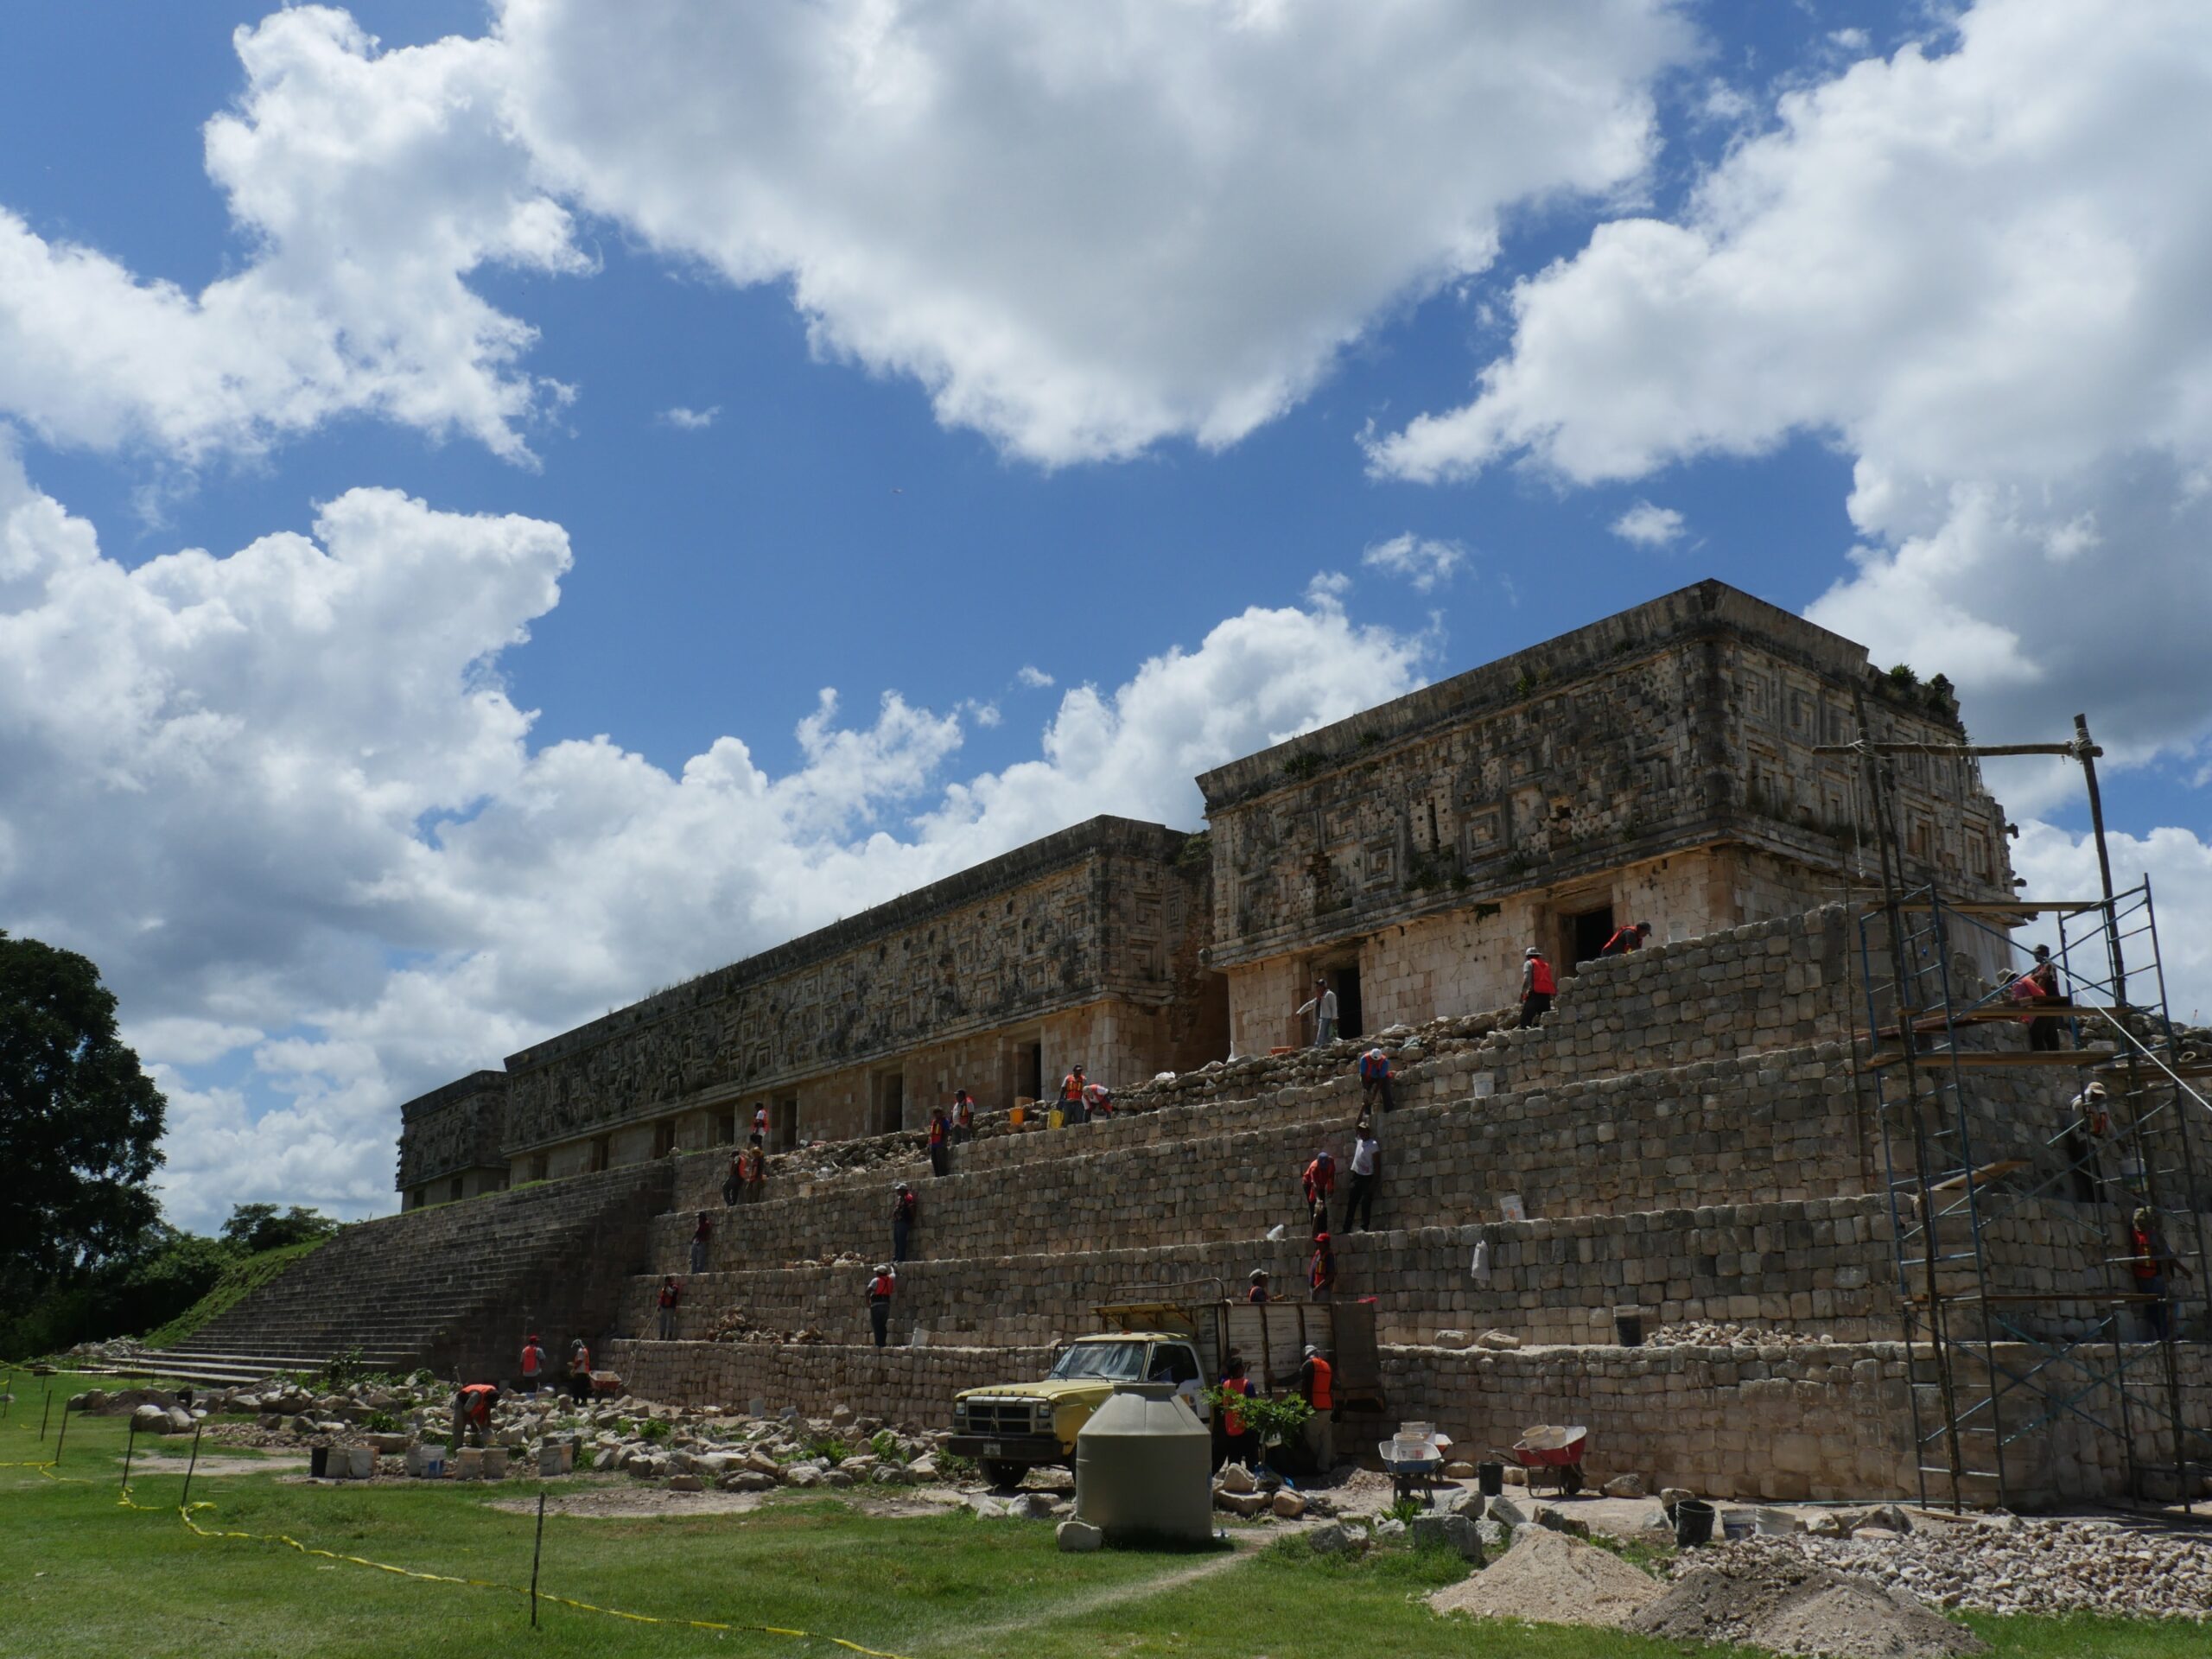 Construction workers work to restore the ruins of the Palace of the Governor in Uxmal, Mexico.